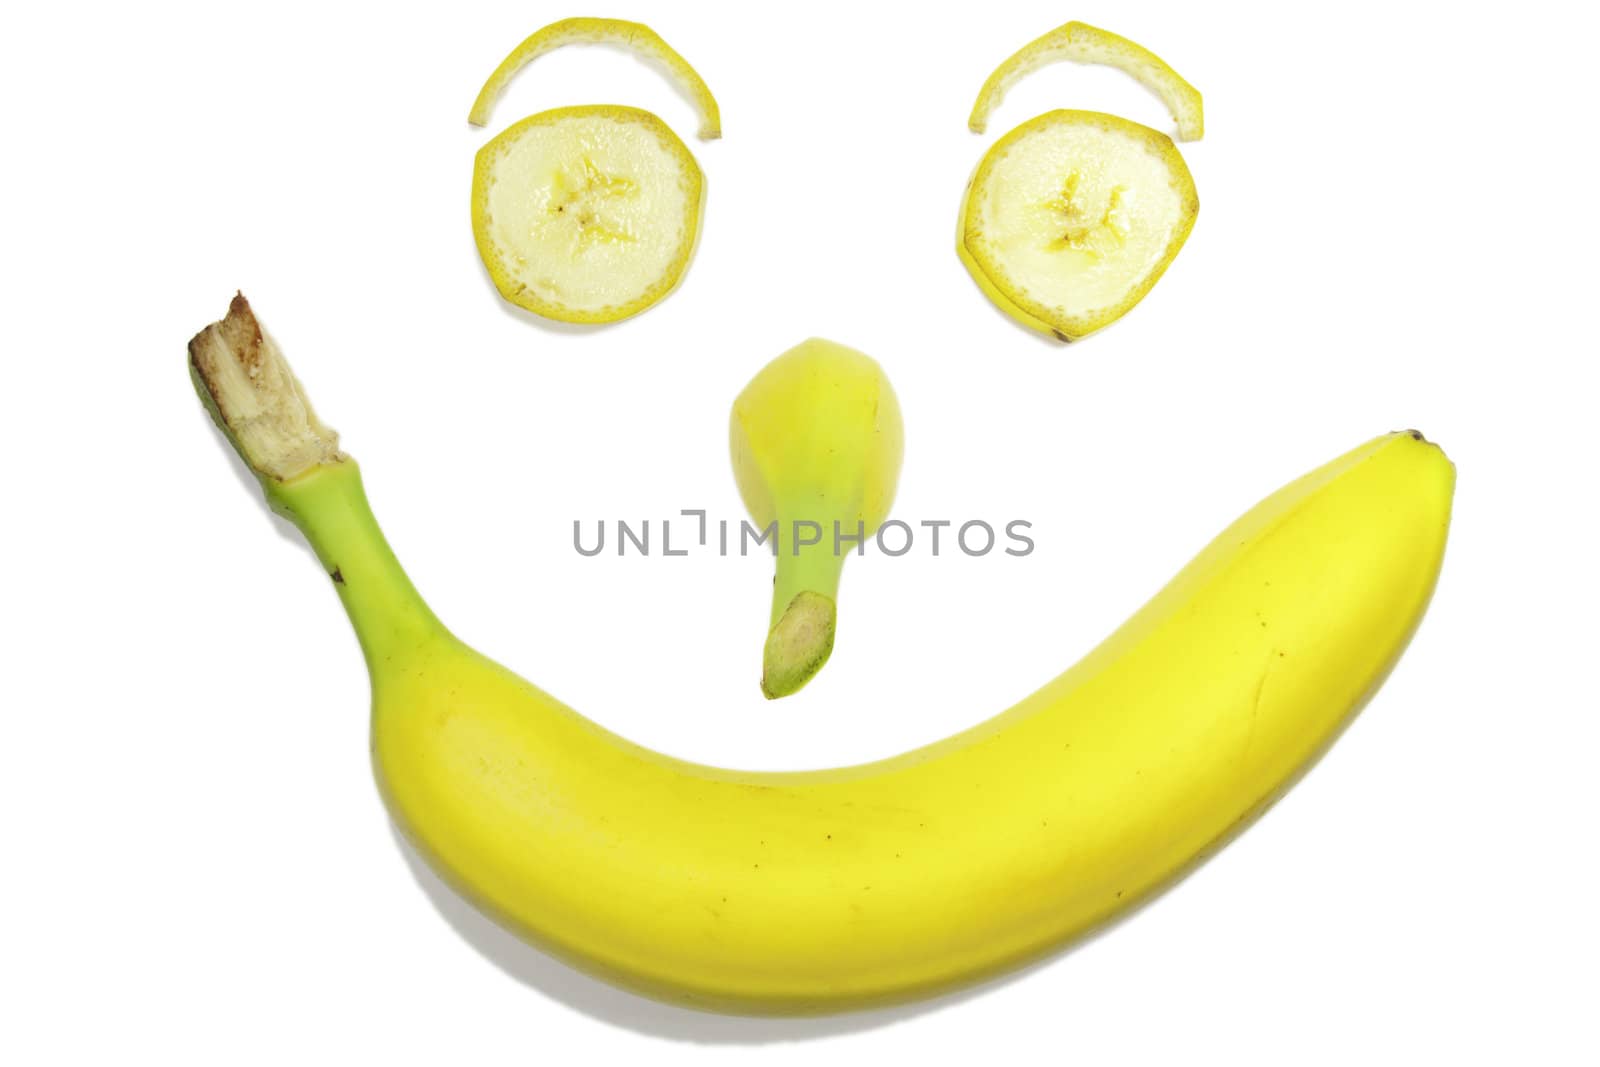 Picture of different banana parts smiling